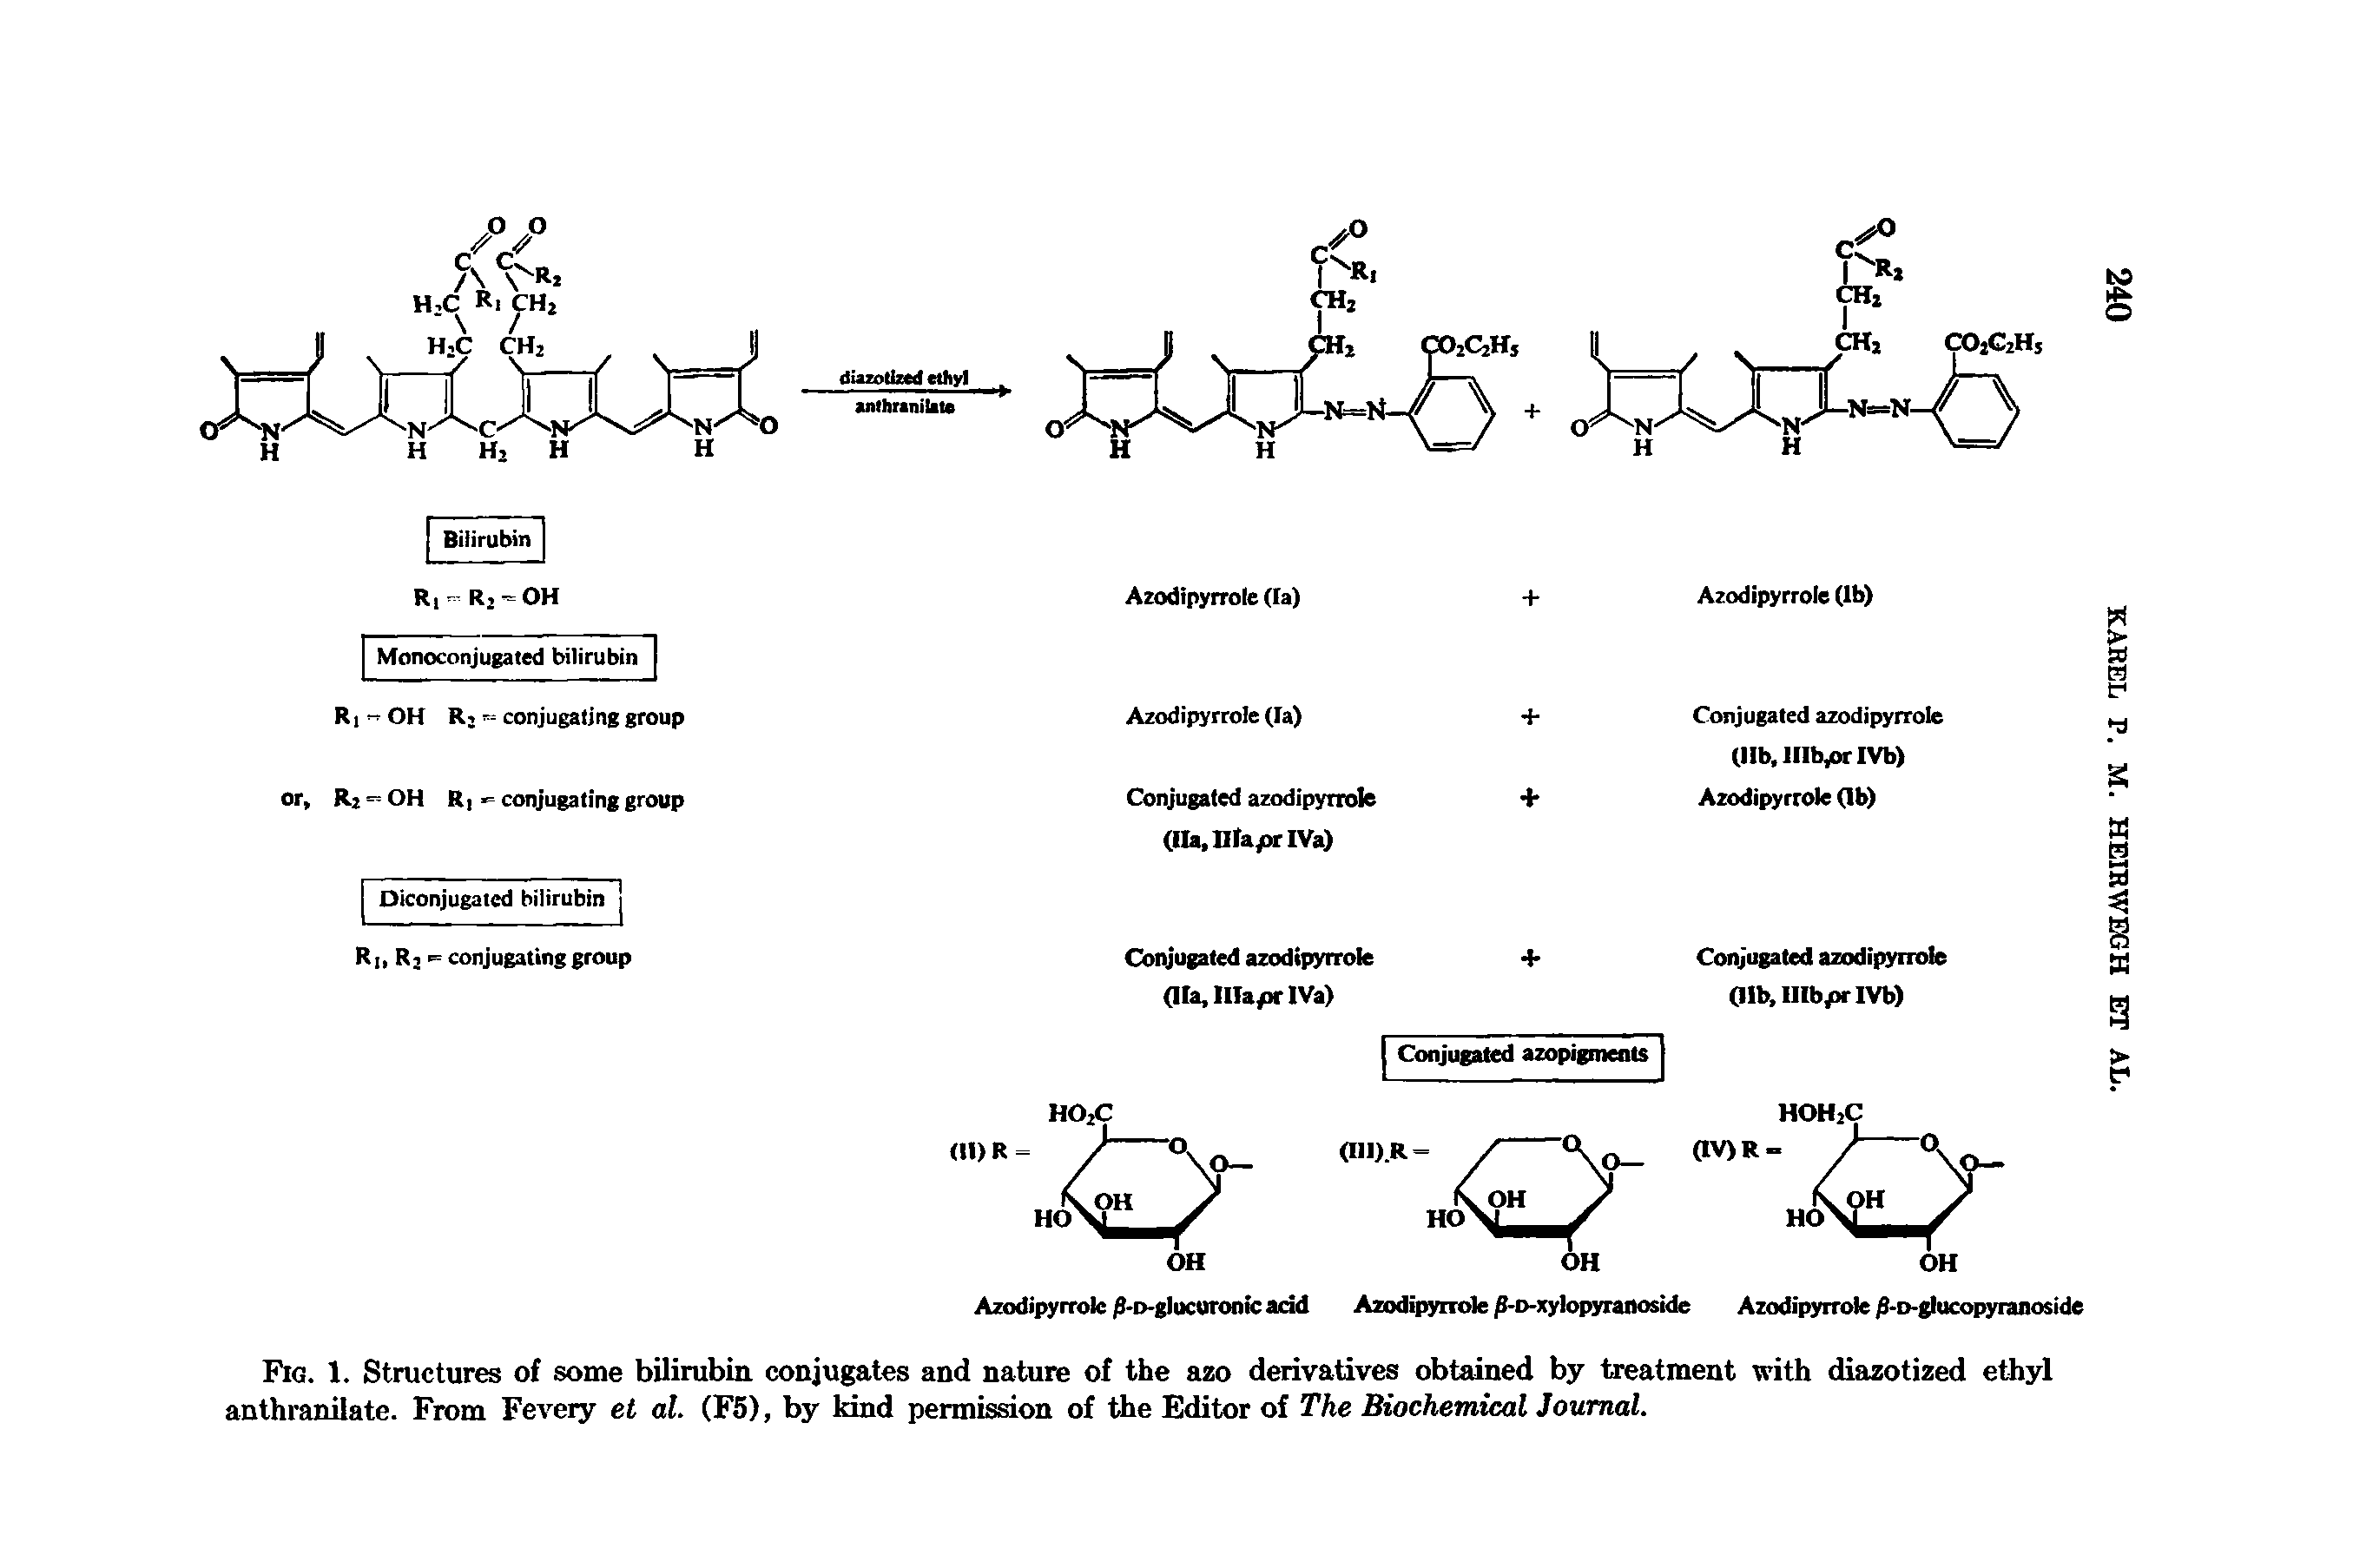 Fig. 1. Structures of some bilirubin conjugates and nature of the azo derivatives obtained by treatment with diazotized ethyl anthranilate. From Fevery et al. (F5), by kind permission of the Editor of The BiochemicalJoumal.